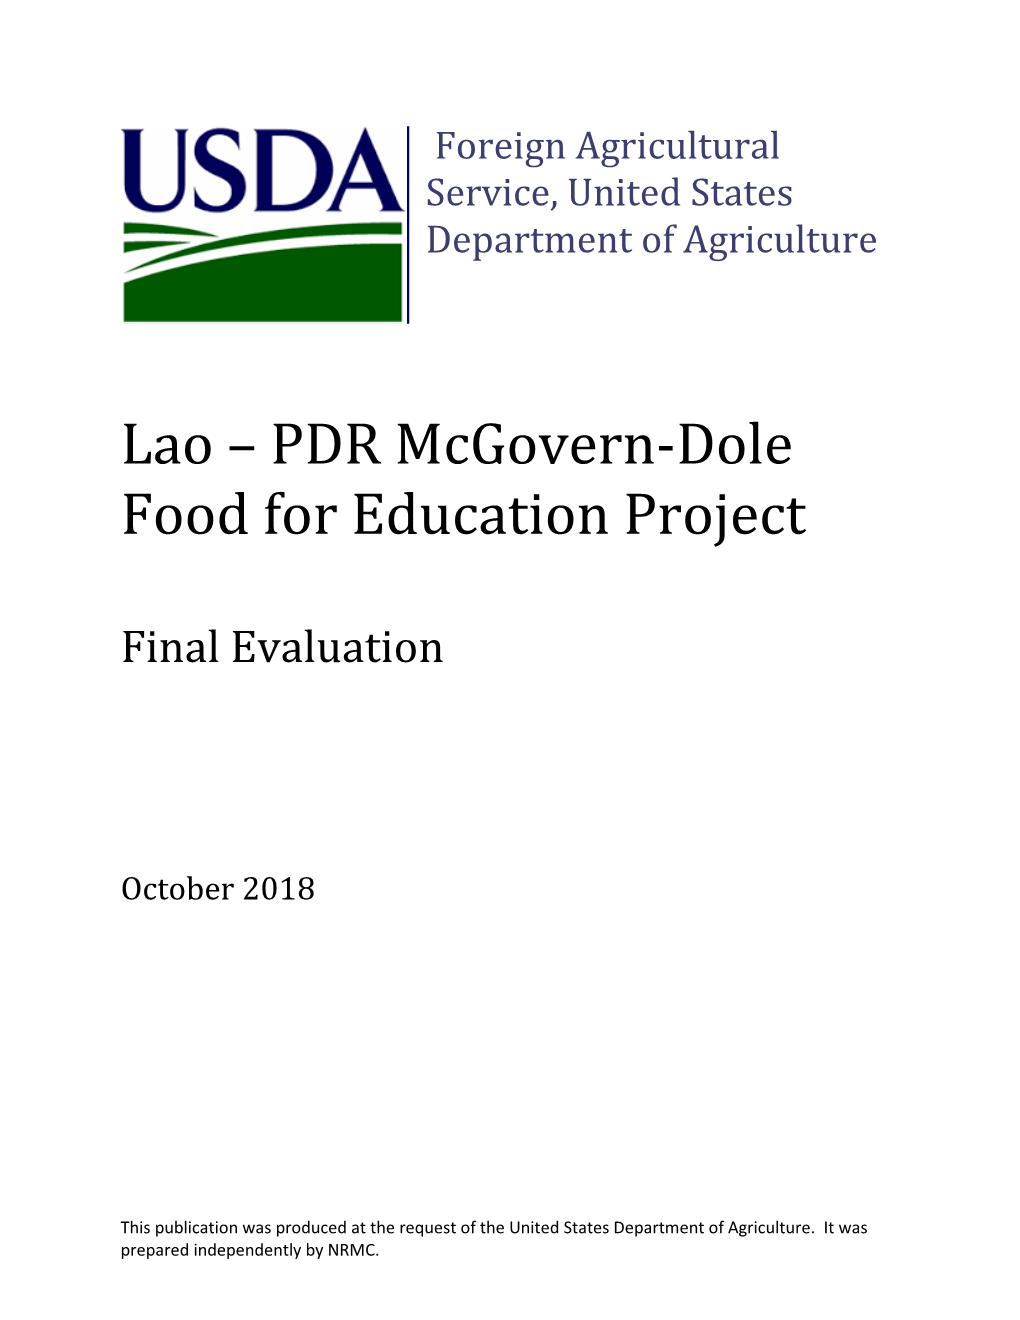 Lao – PDR Mcgovern-Dole Food for Education Project